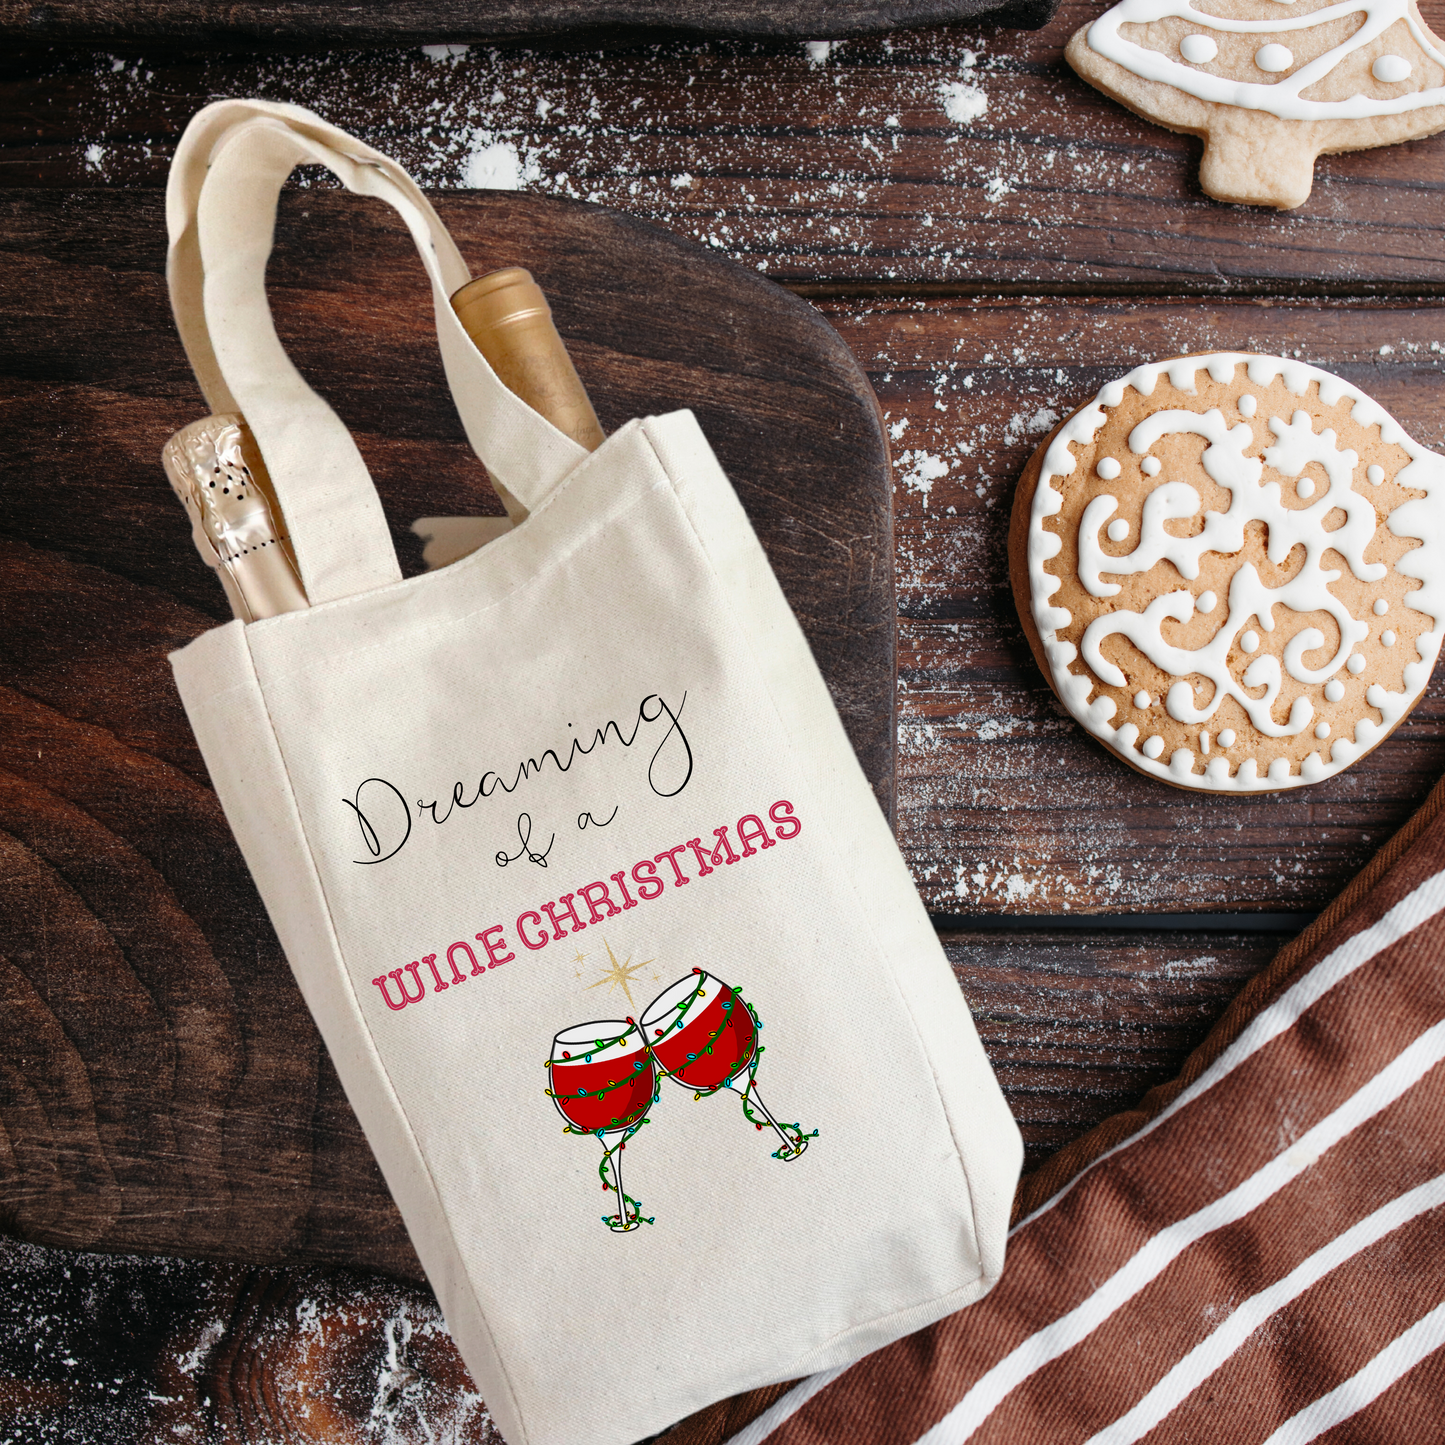 Dreaming of a Wine Christmas (Double Wine Tote Bag)